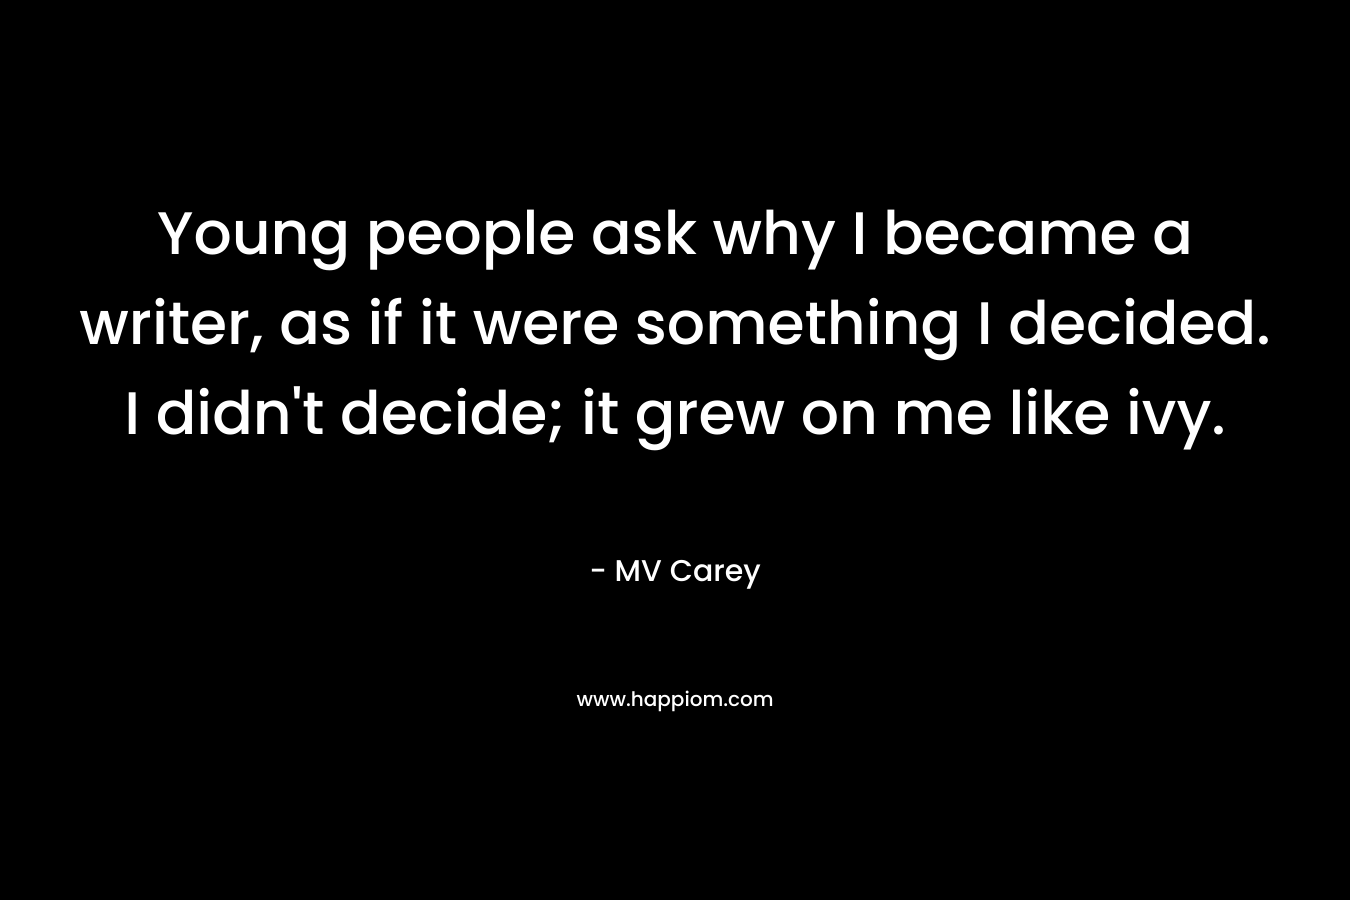 Young people ask why I became a writer, as if it were something I decided. I didn’t decide; it grew on me like ivy. – MV Carey